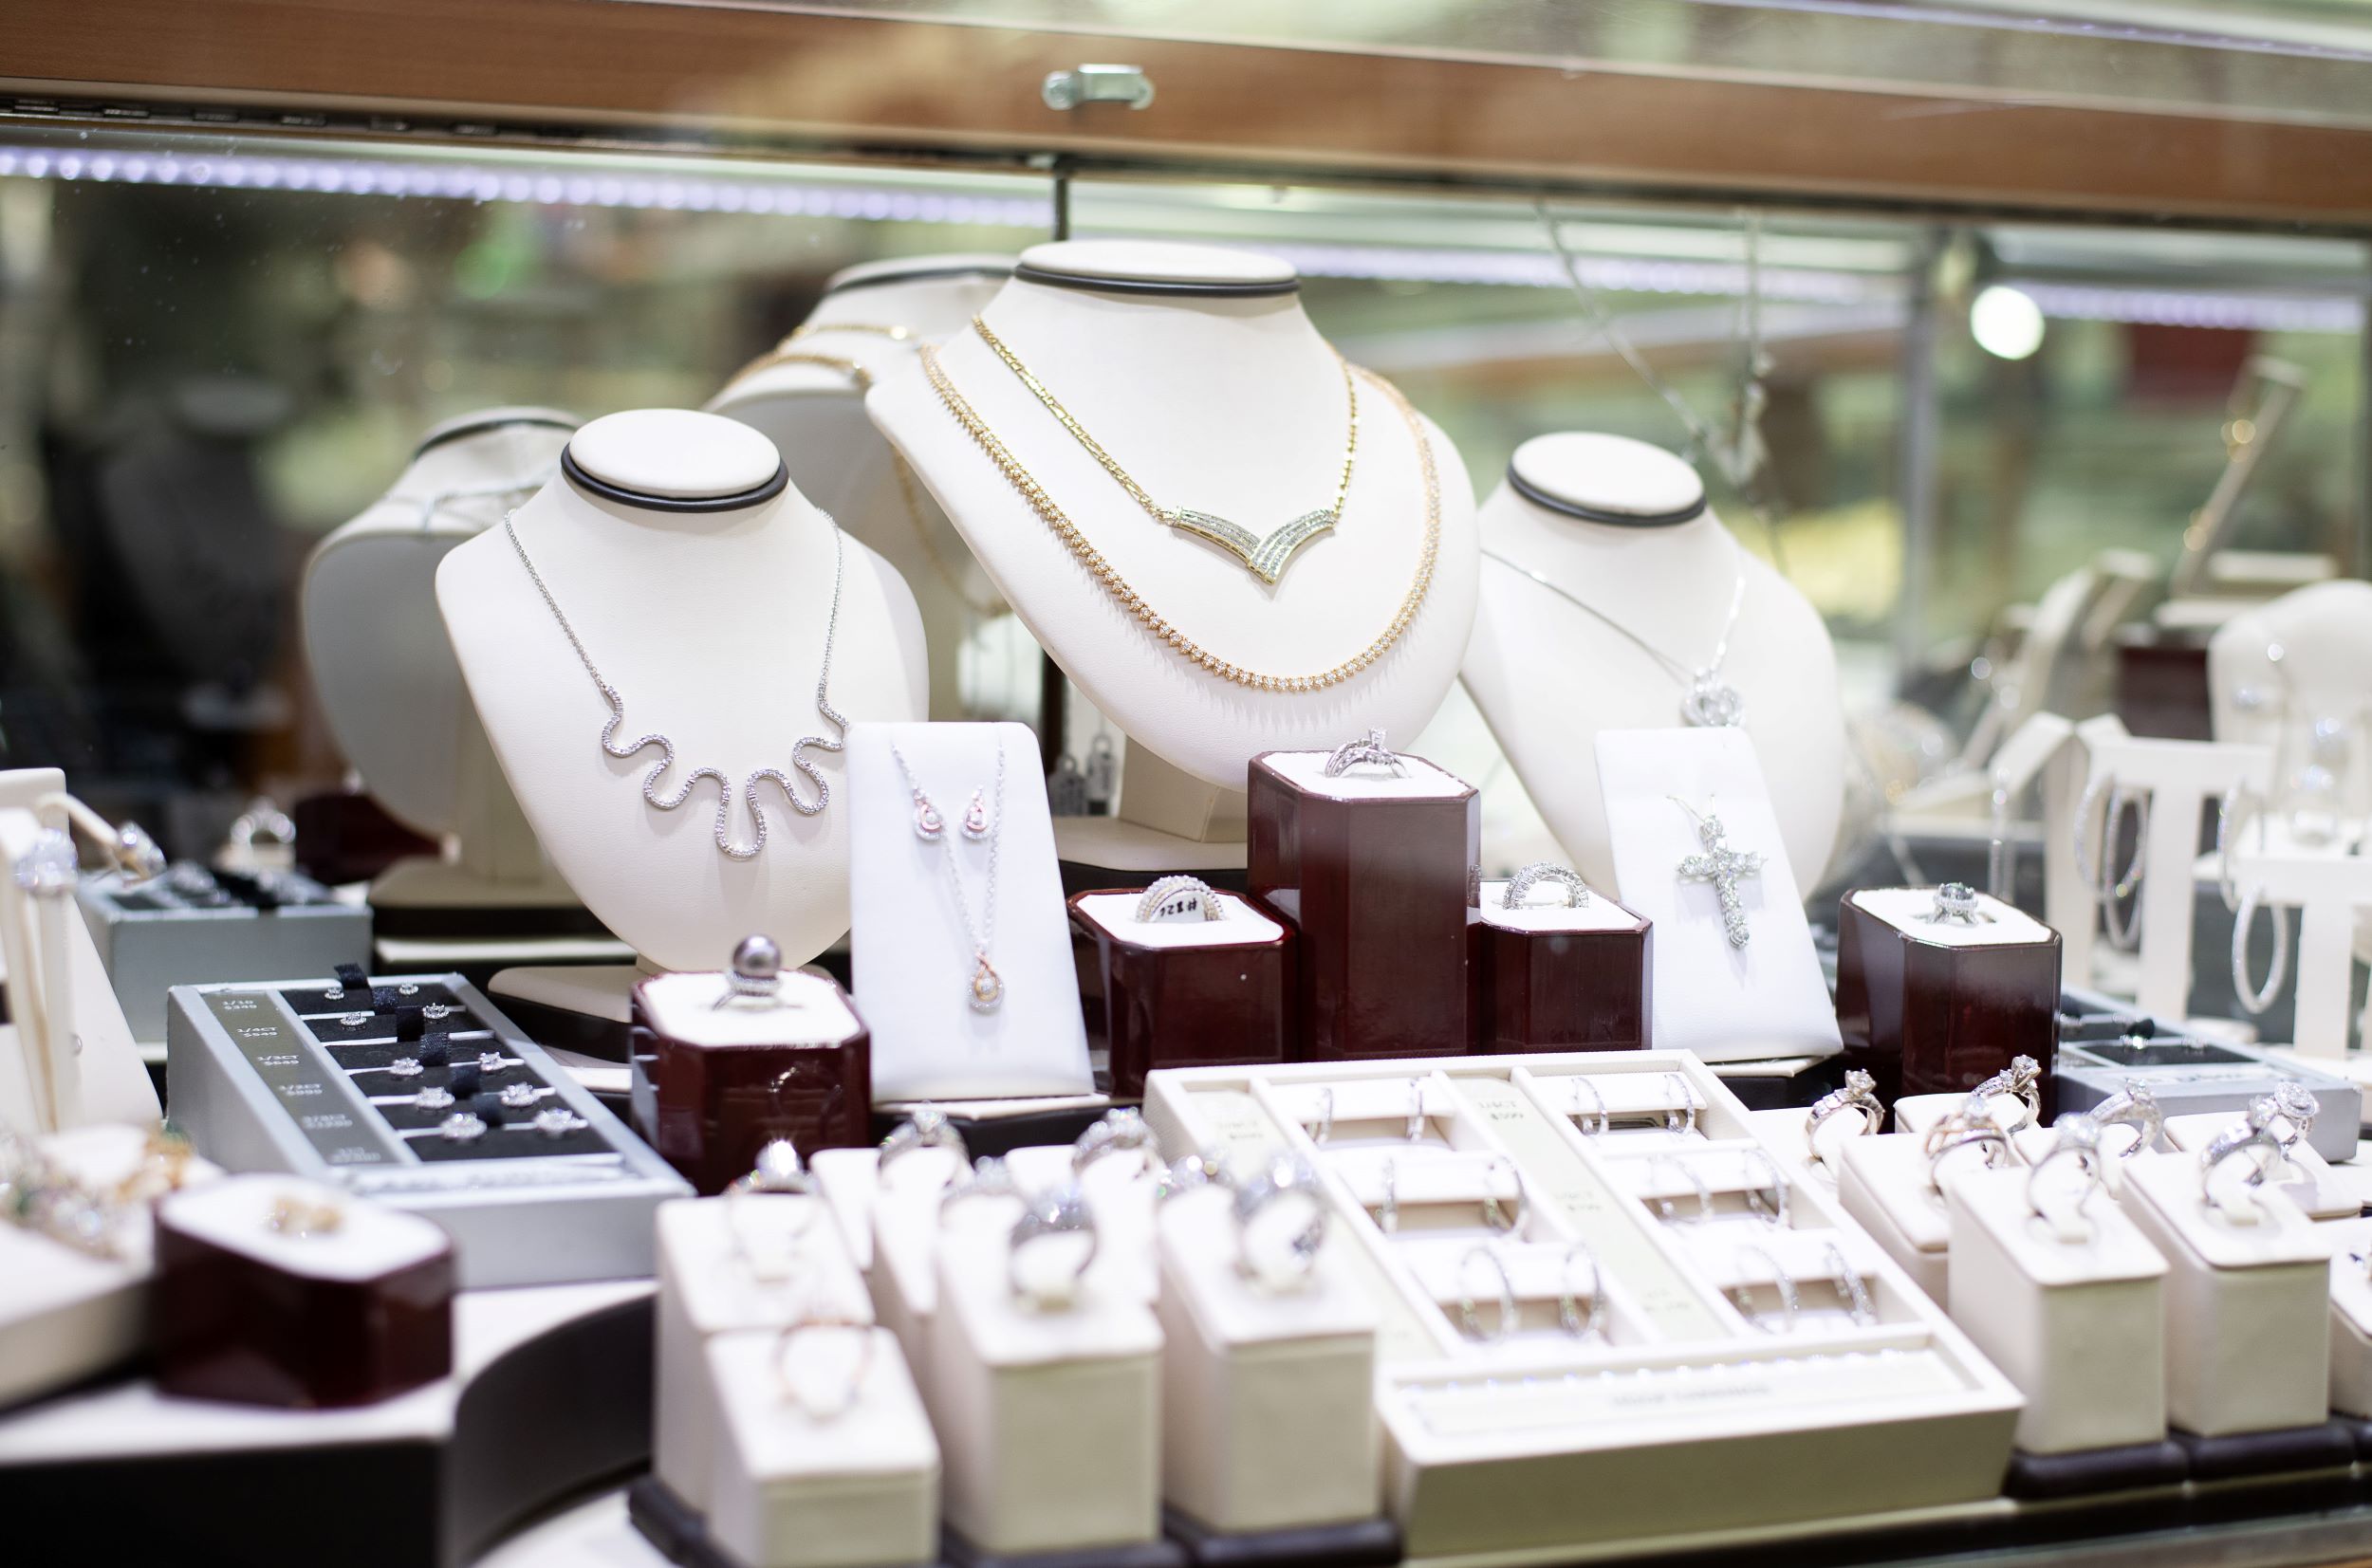 An array of elegant jewelry displayed on stands and in boxes inside a glass showcase, featuring necklaces, earrings, and rings in a store setting.